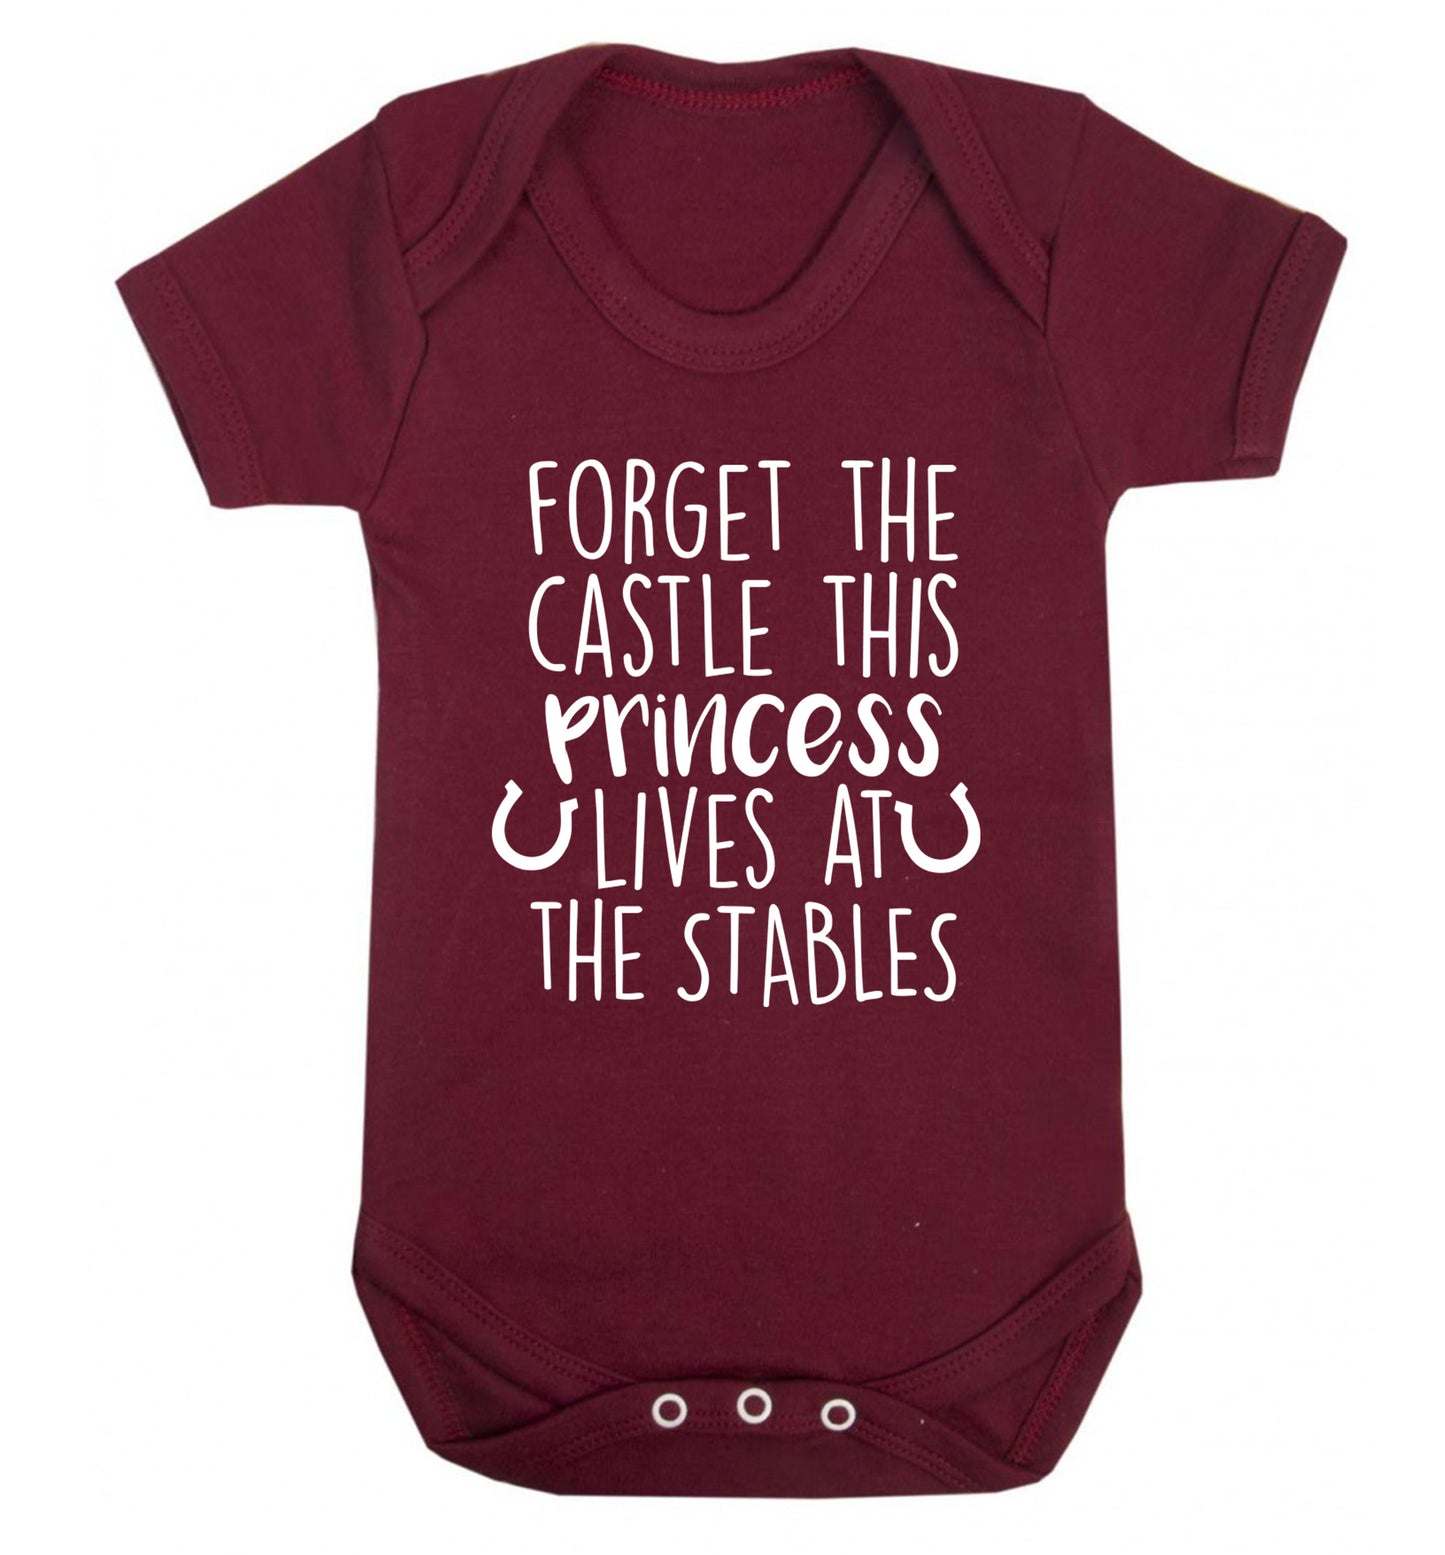 Forget the castle this princess lives at the stables Baby Vest maroon 18-24 months